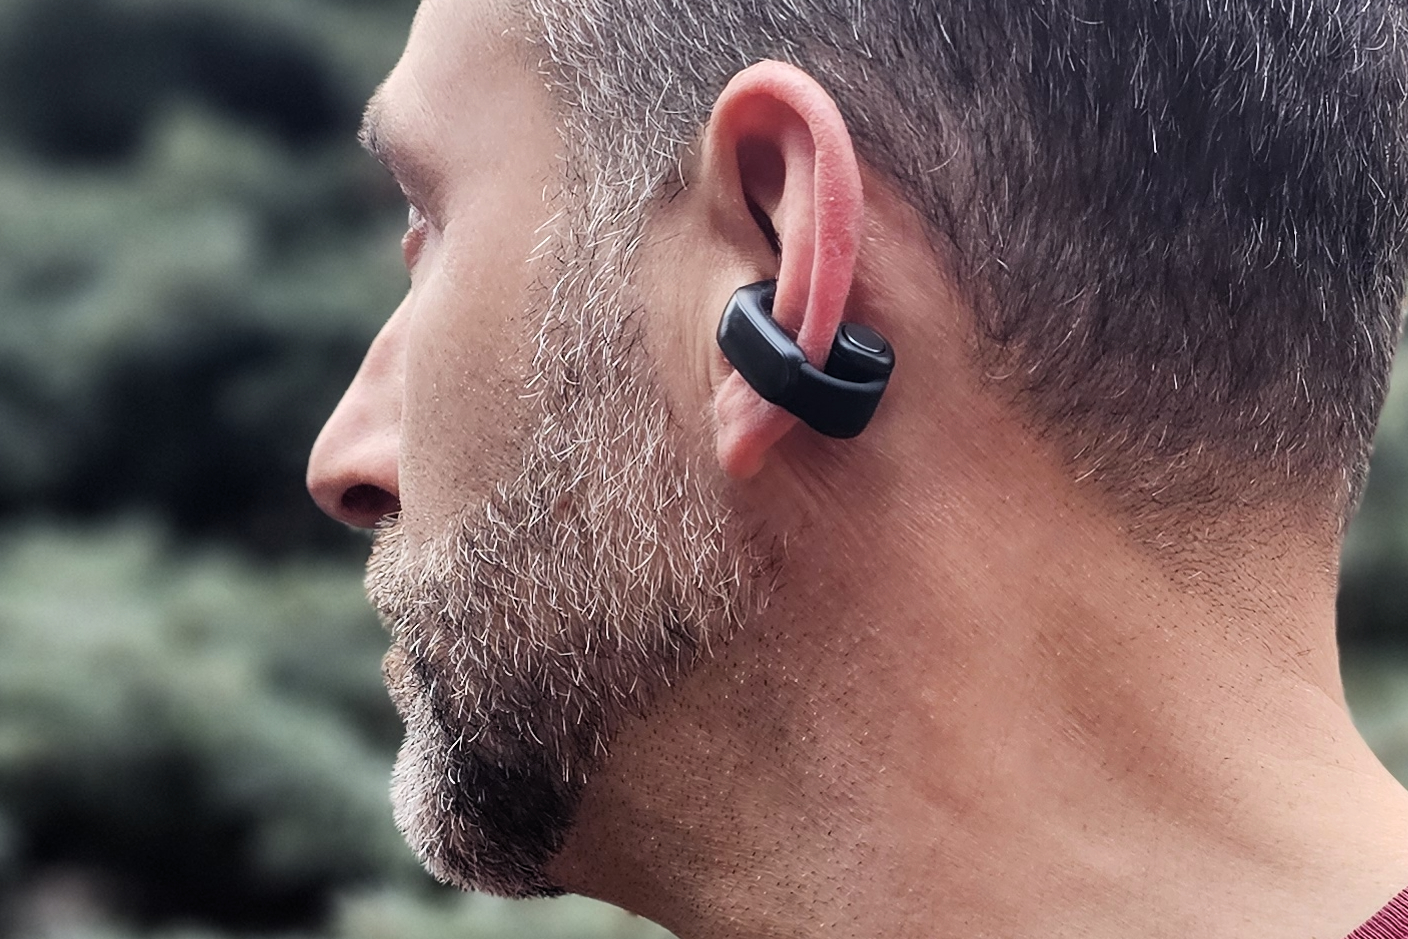 Bose Sport Open Earbuds Review